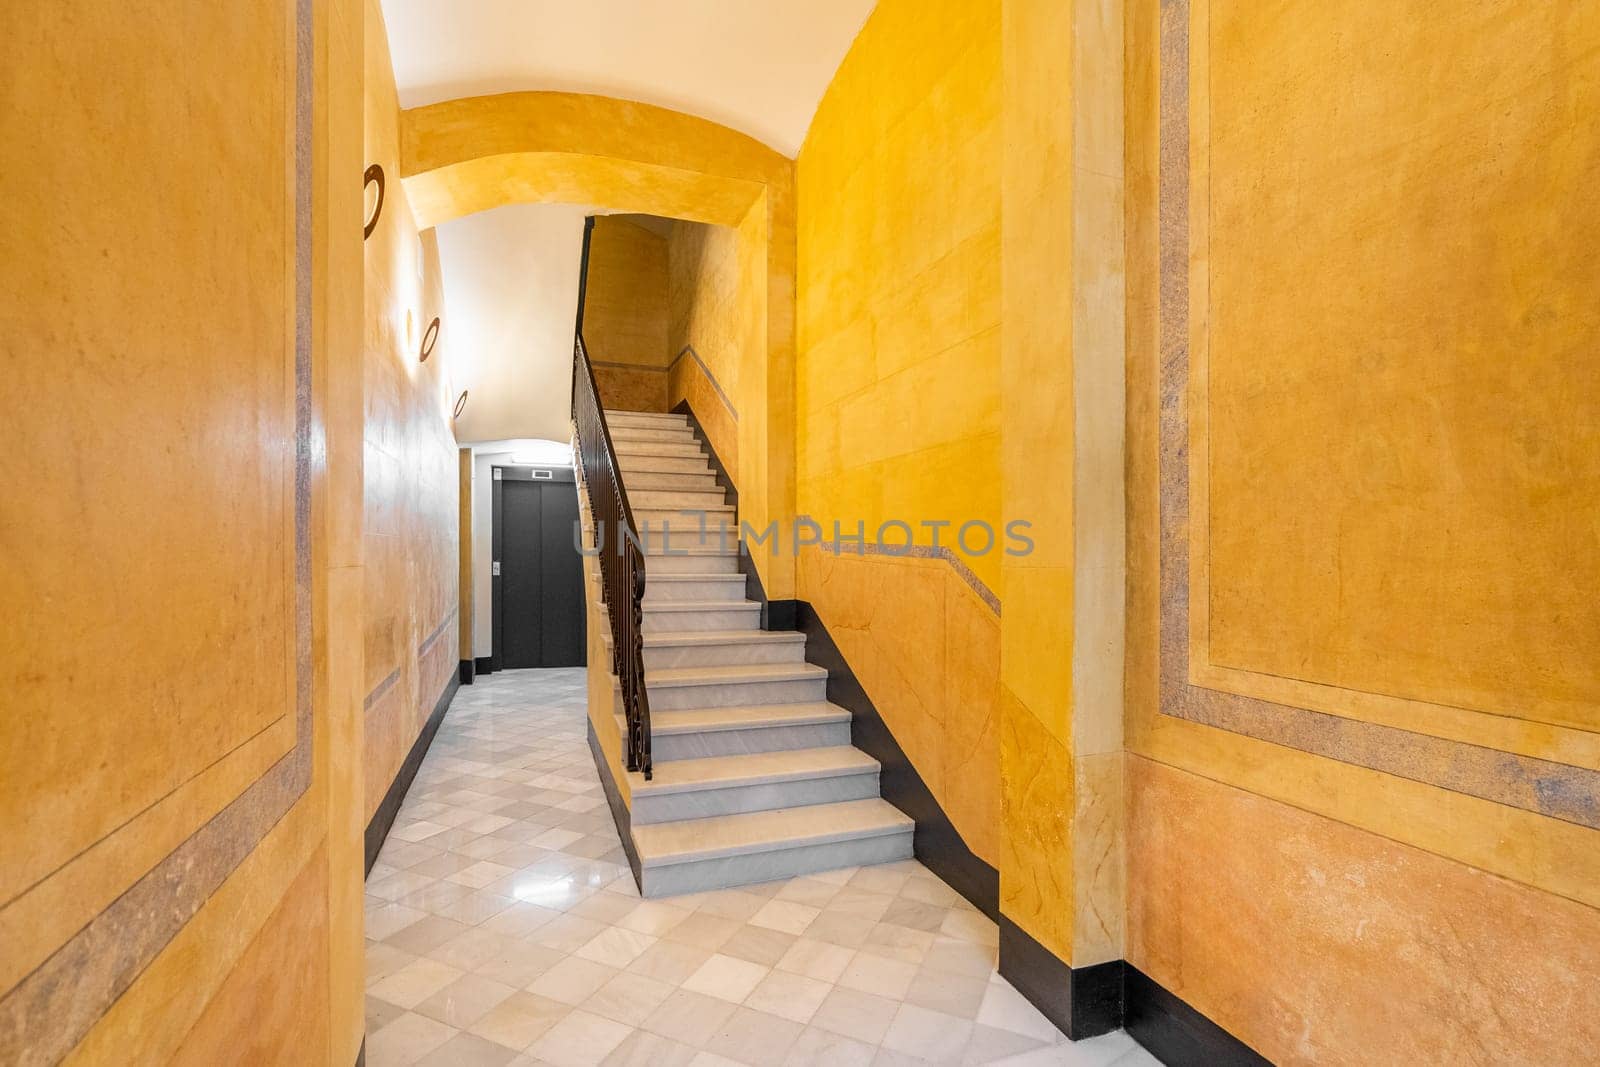 Stairs in yellow-walled hallway at entrance of building by apavlin